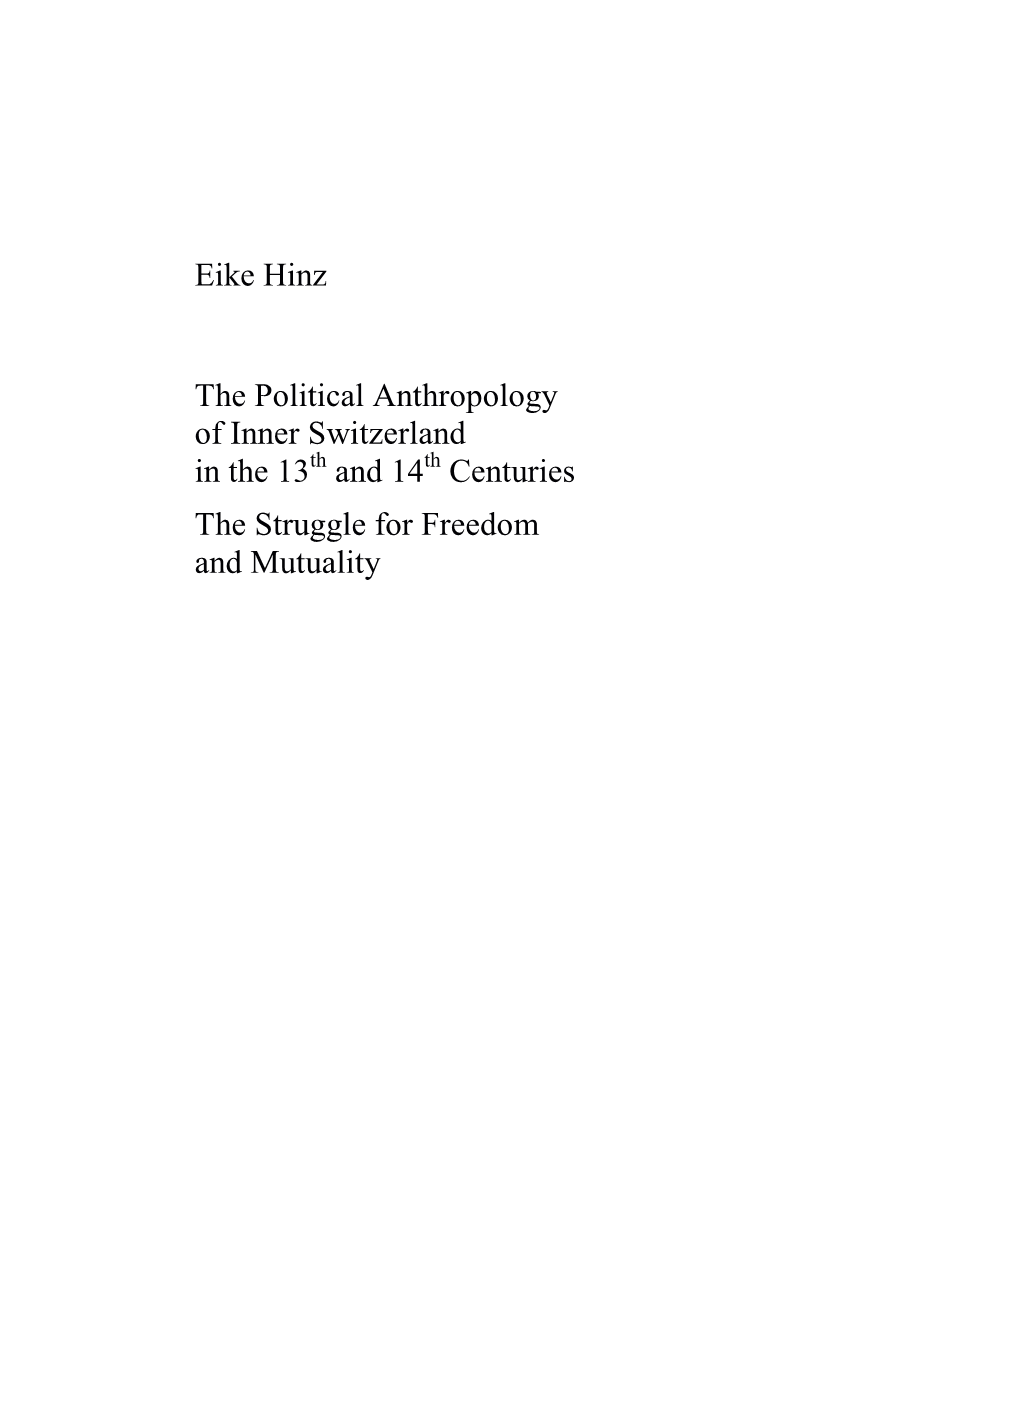 Eike Hinz the Political Anthropology of Inner Switzerland in the 13Th And